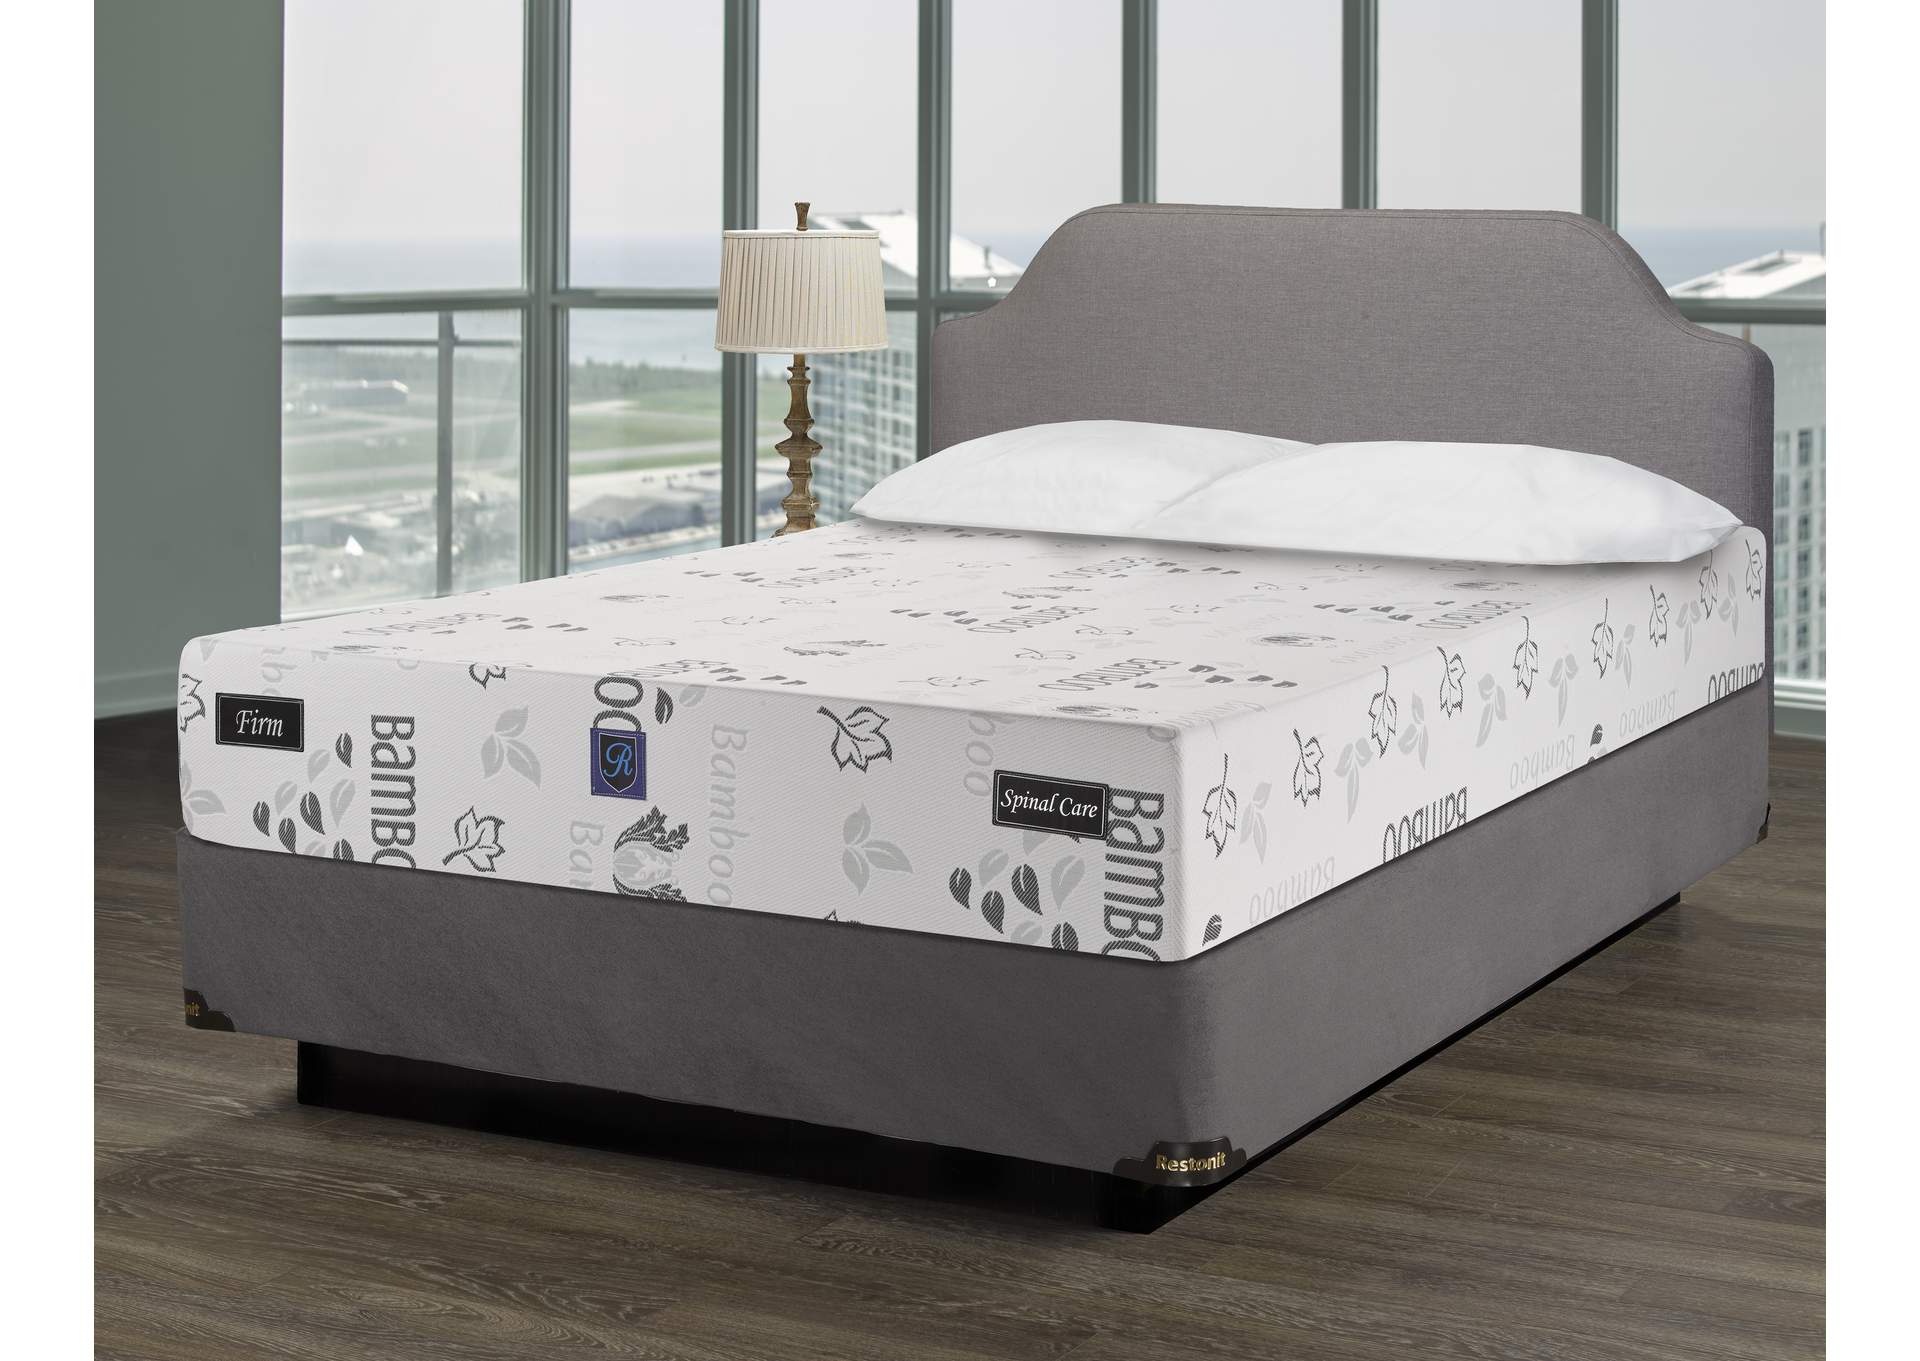 Spinal Care Full Mattress - 10",Galaxy Home Furniture